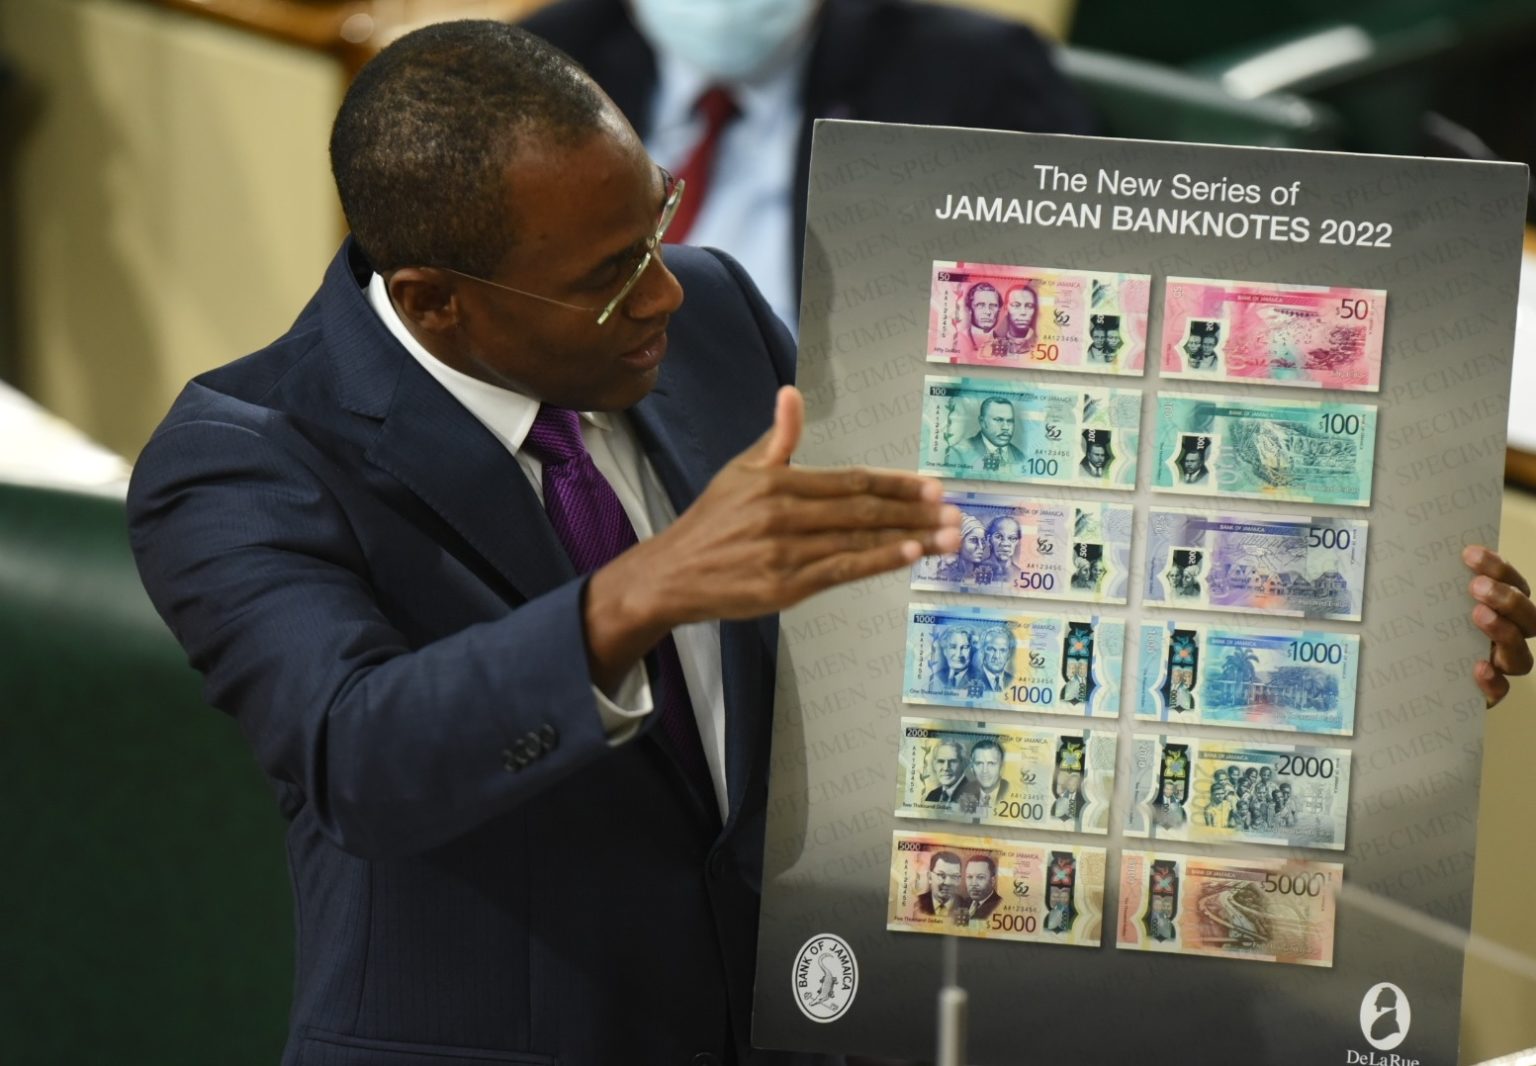 Nigel Clarke New Jamaican Banknotes Our Today Feature 1536x1066 